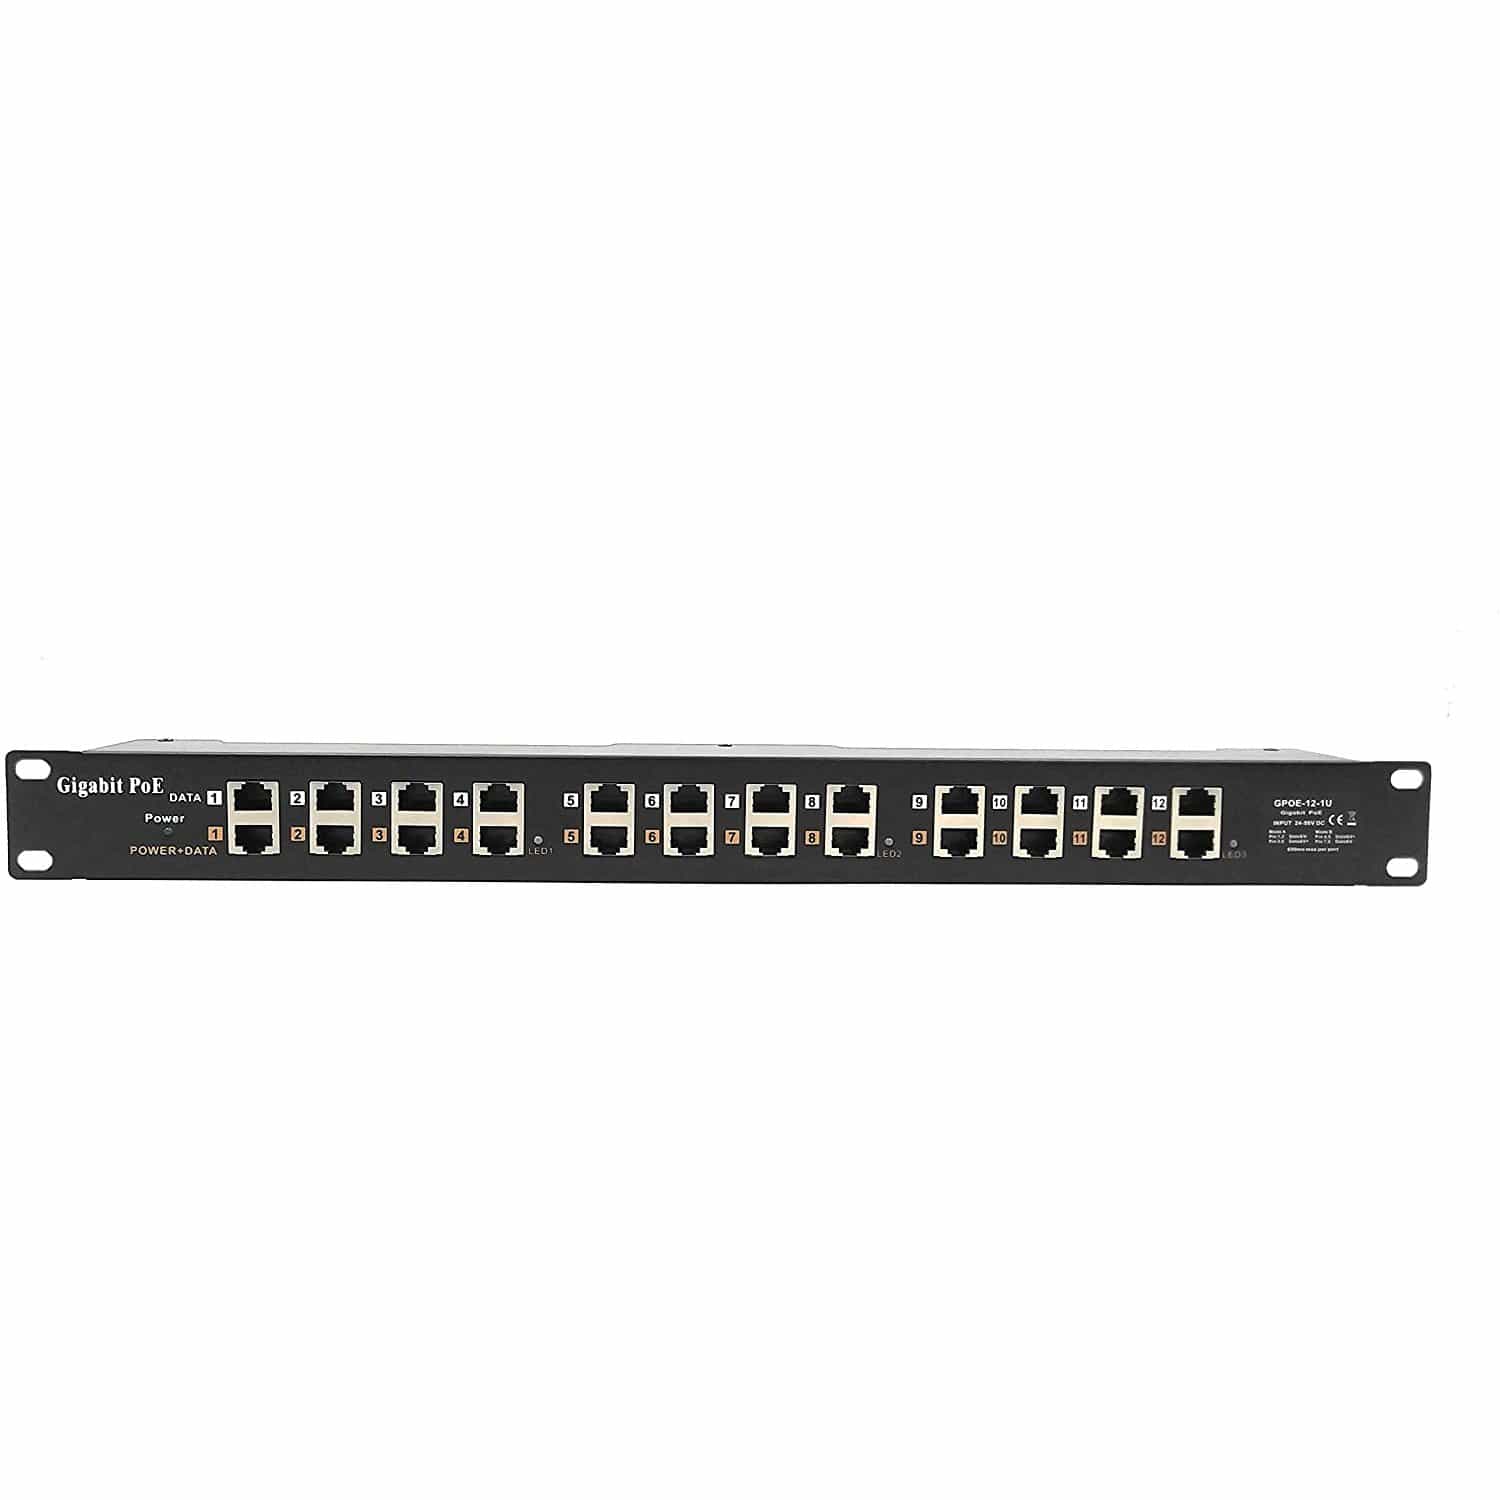 Buy PoE Texas - PoE Injector - 12 Port Gigabit Passive Midspan Injector  with 48V 120 Watt UL Power Supply - Power Over Ethernet for 802.3af or at ( PoE+) Devices VoIP Phone